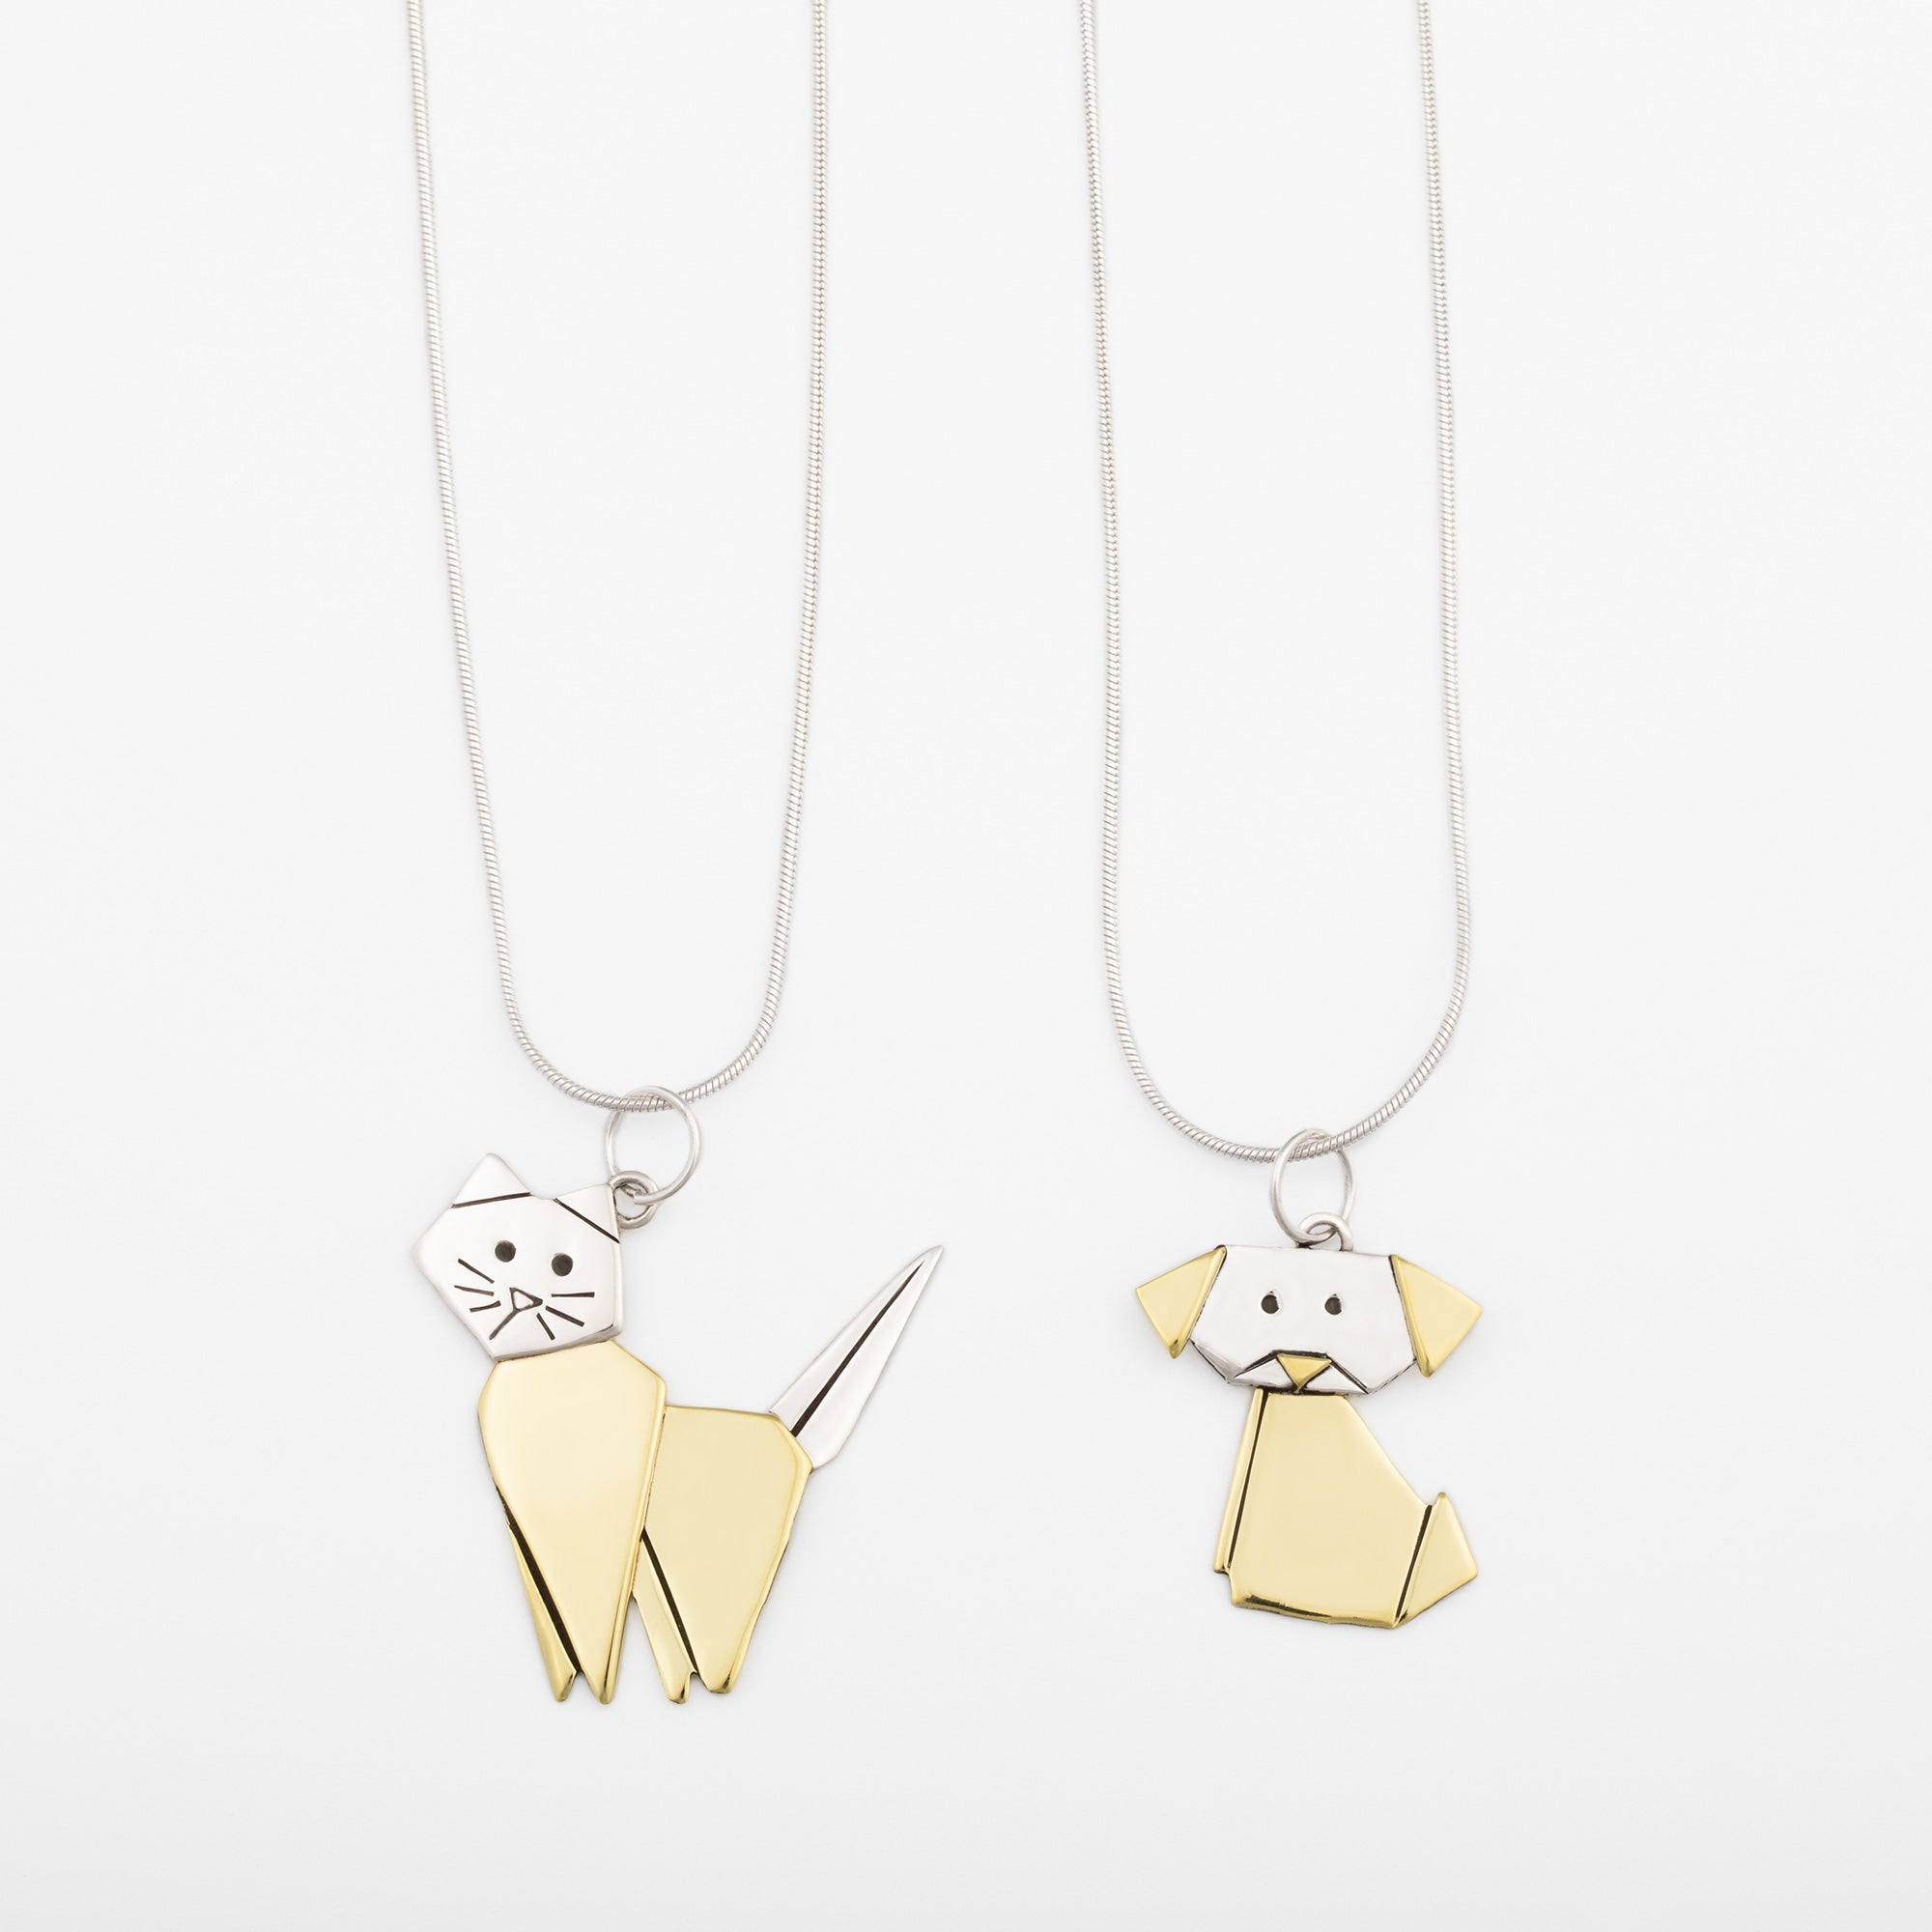 Origami Pet Necklace - Dog - With Snake Chain